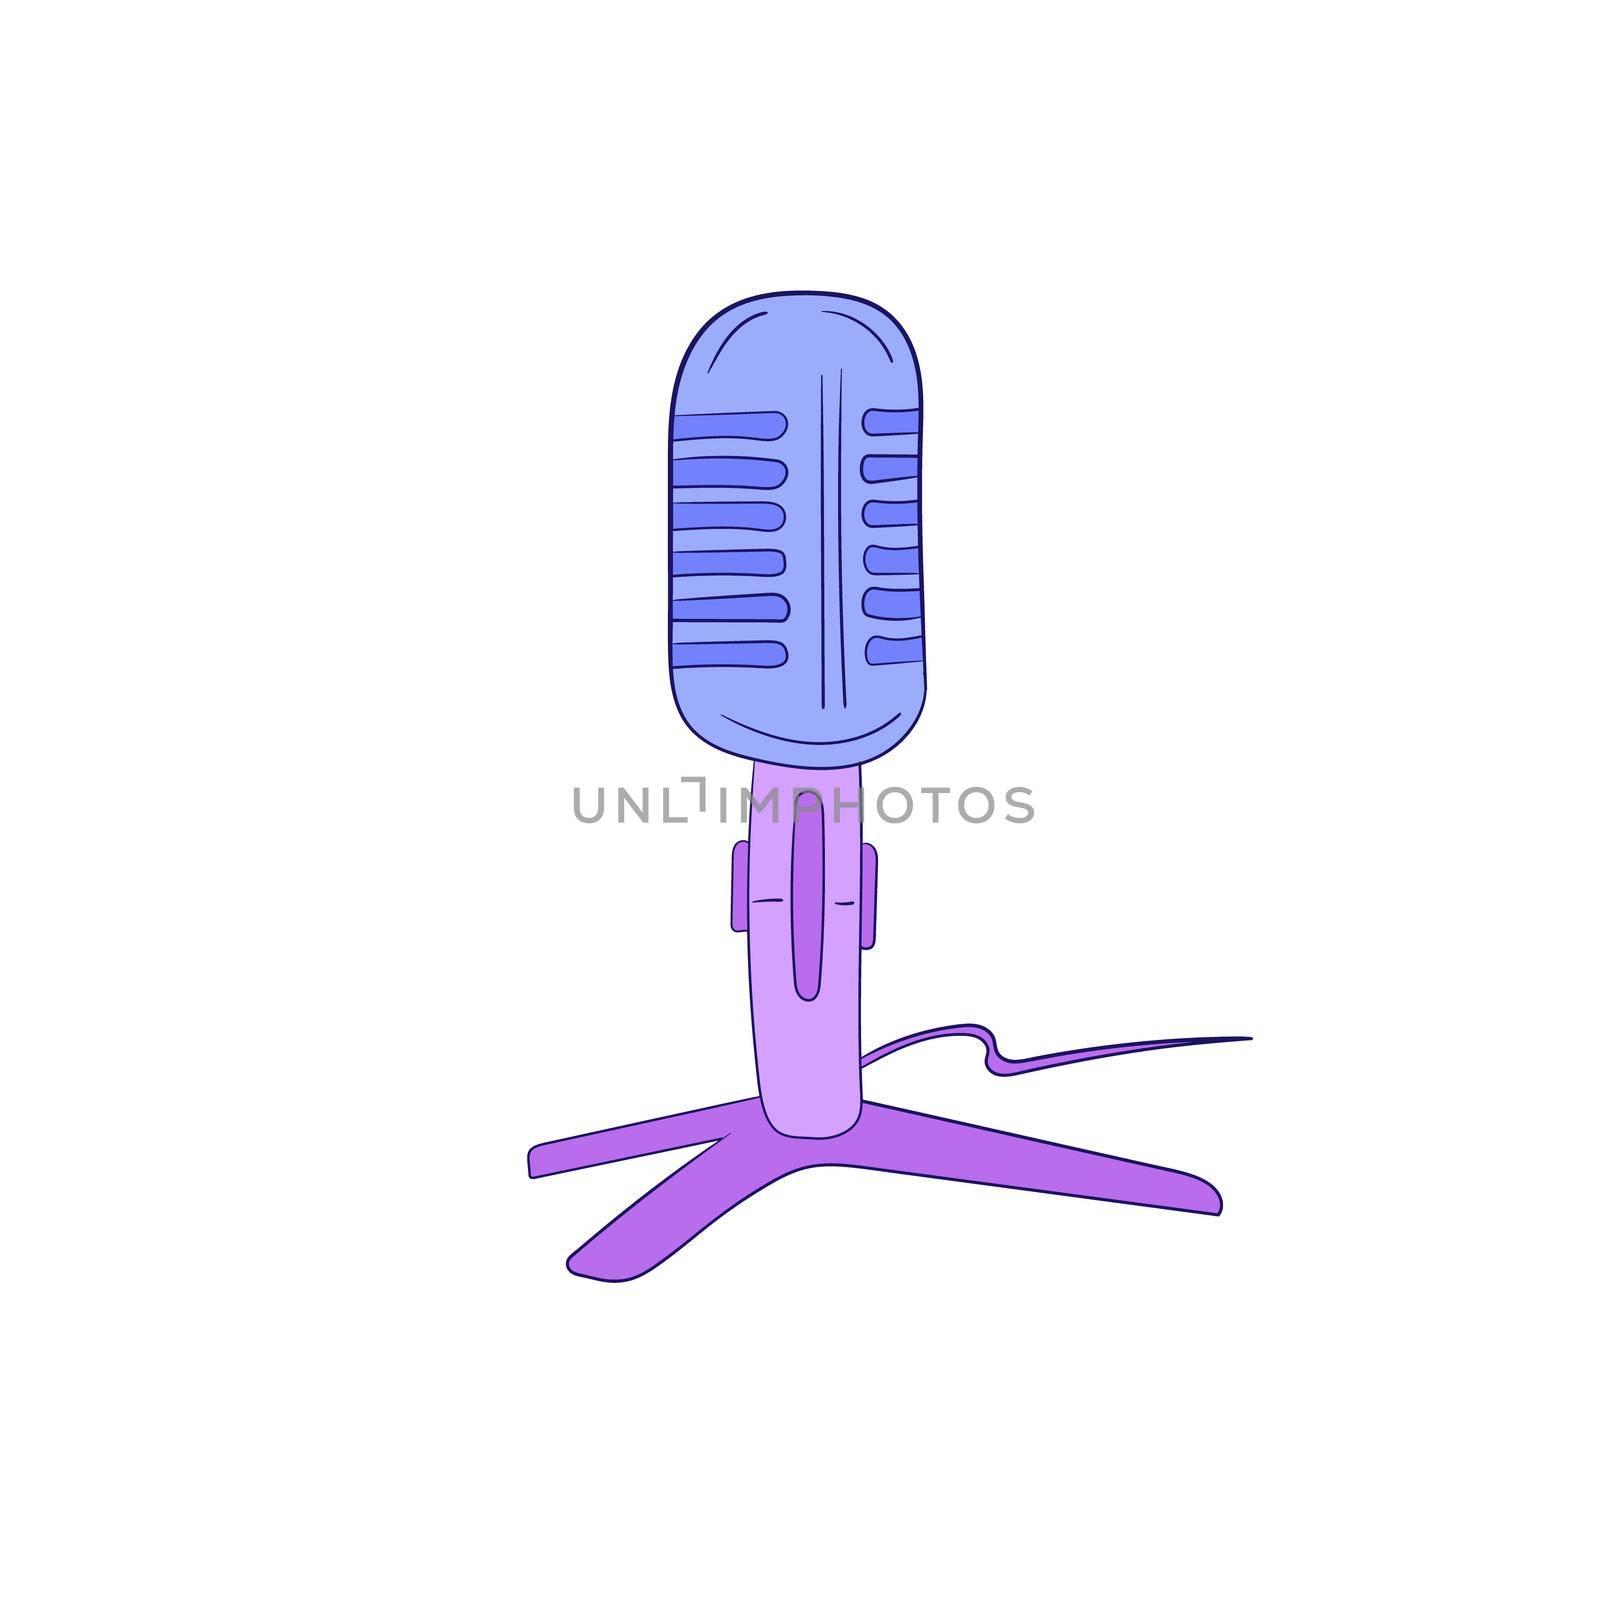 Podcast. Retro microphone isolated on white background. Design element for emblem, sign. Vector illustration. Hand drawn icon in modern color